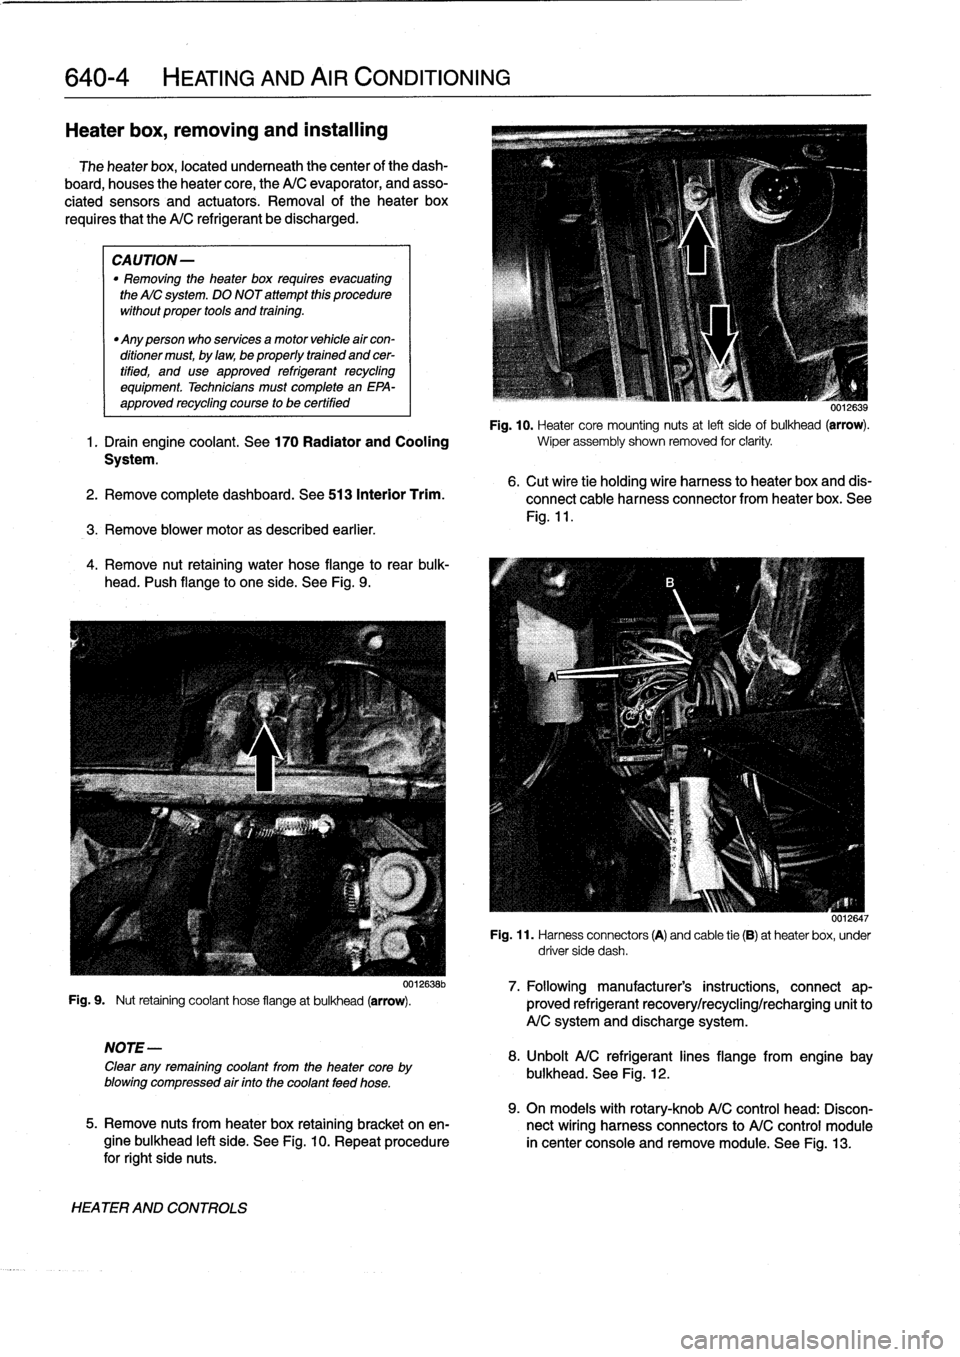 BMW 323i 1993 E36 Repair Manual 
640-4

	

HEATING
AND
AIR
CONDITIONING

Heater
box,
removing
and
installing

The
heater
box,
located
underneath
thecenter
of
the
dash-

board,
houses
theheater
core,
the
A/C
evaporator,
and
asso-

ci